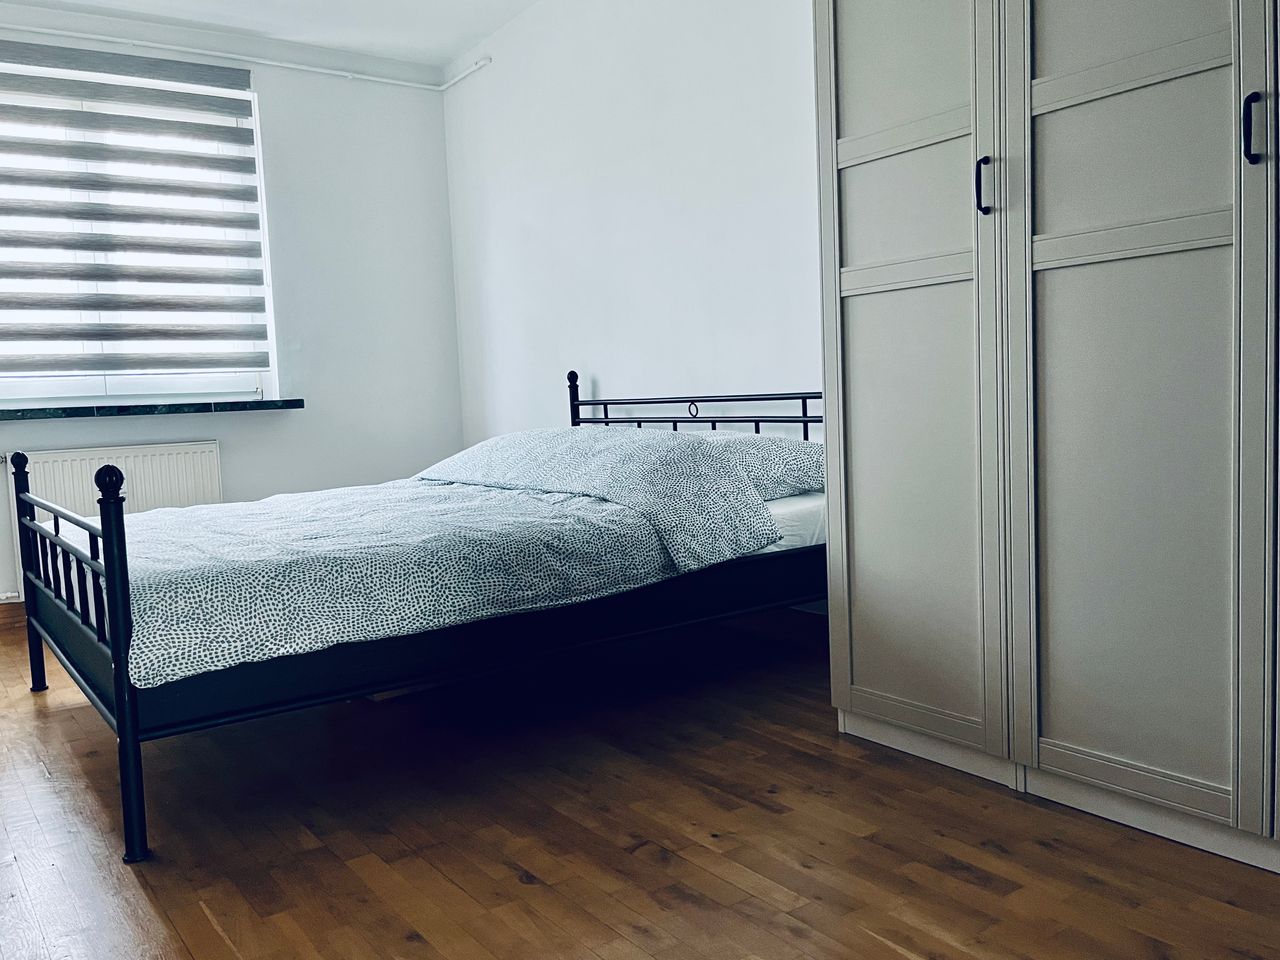 2-room apartment in the center of Berlin / furnished / car parking space